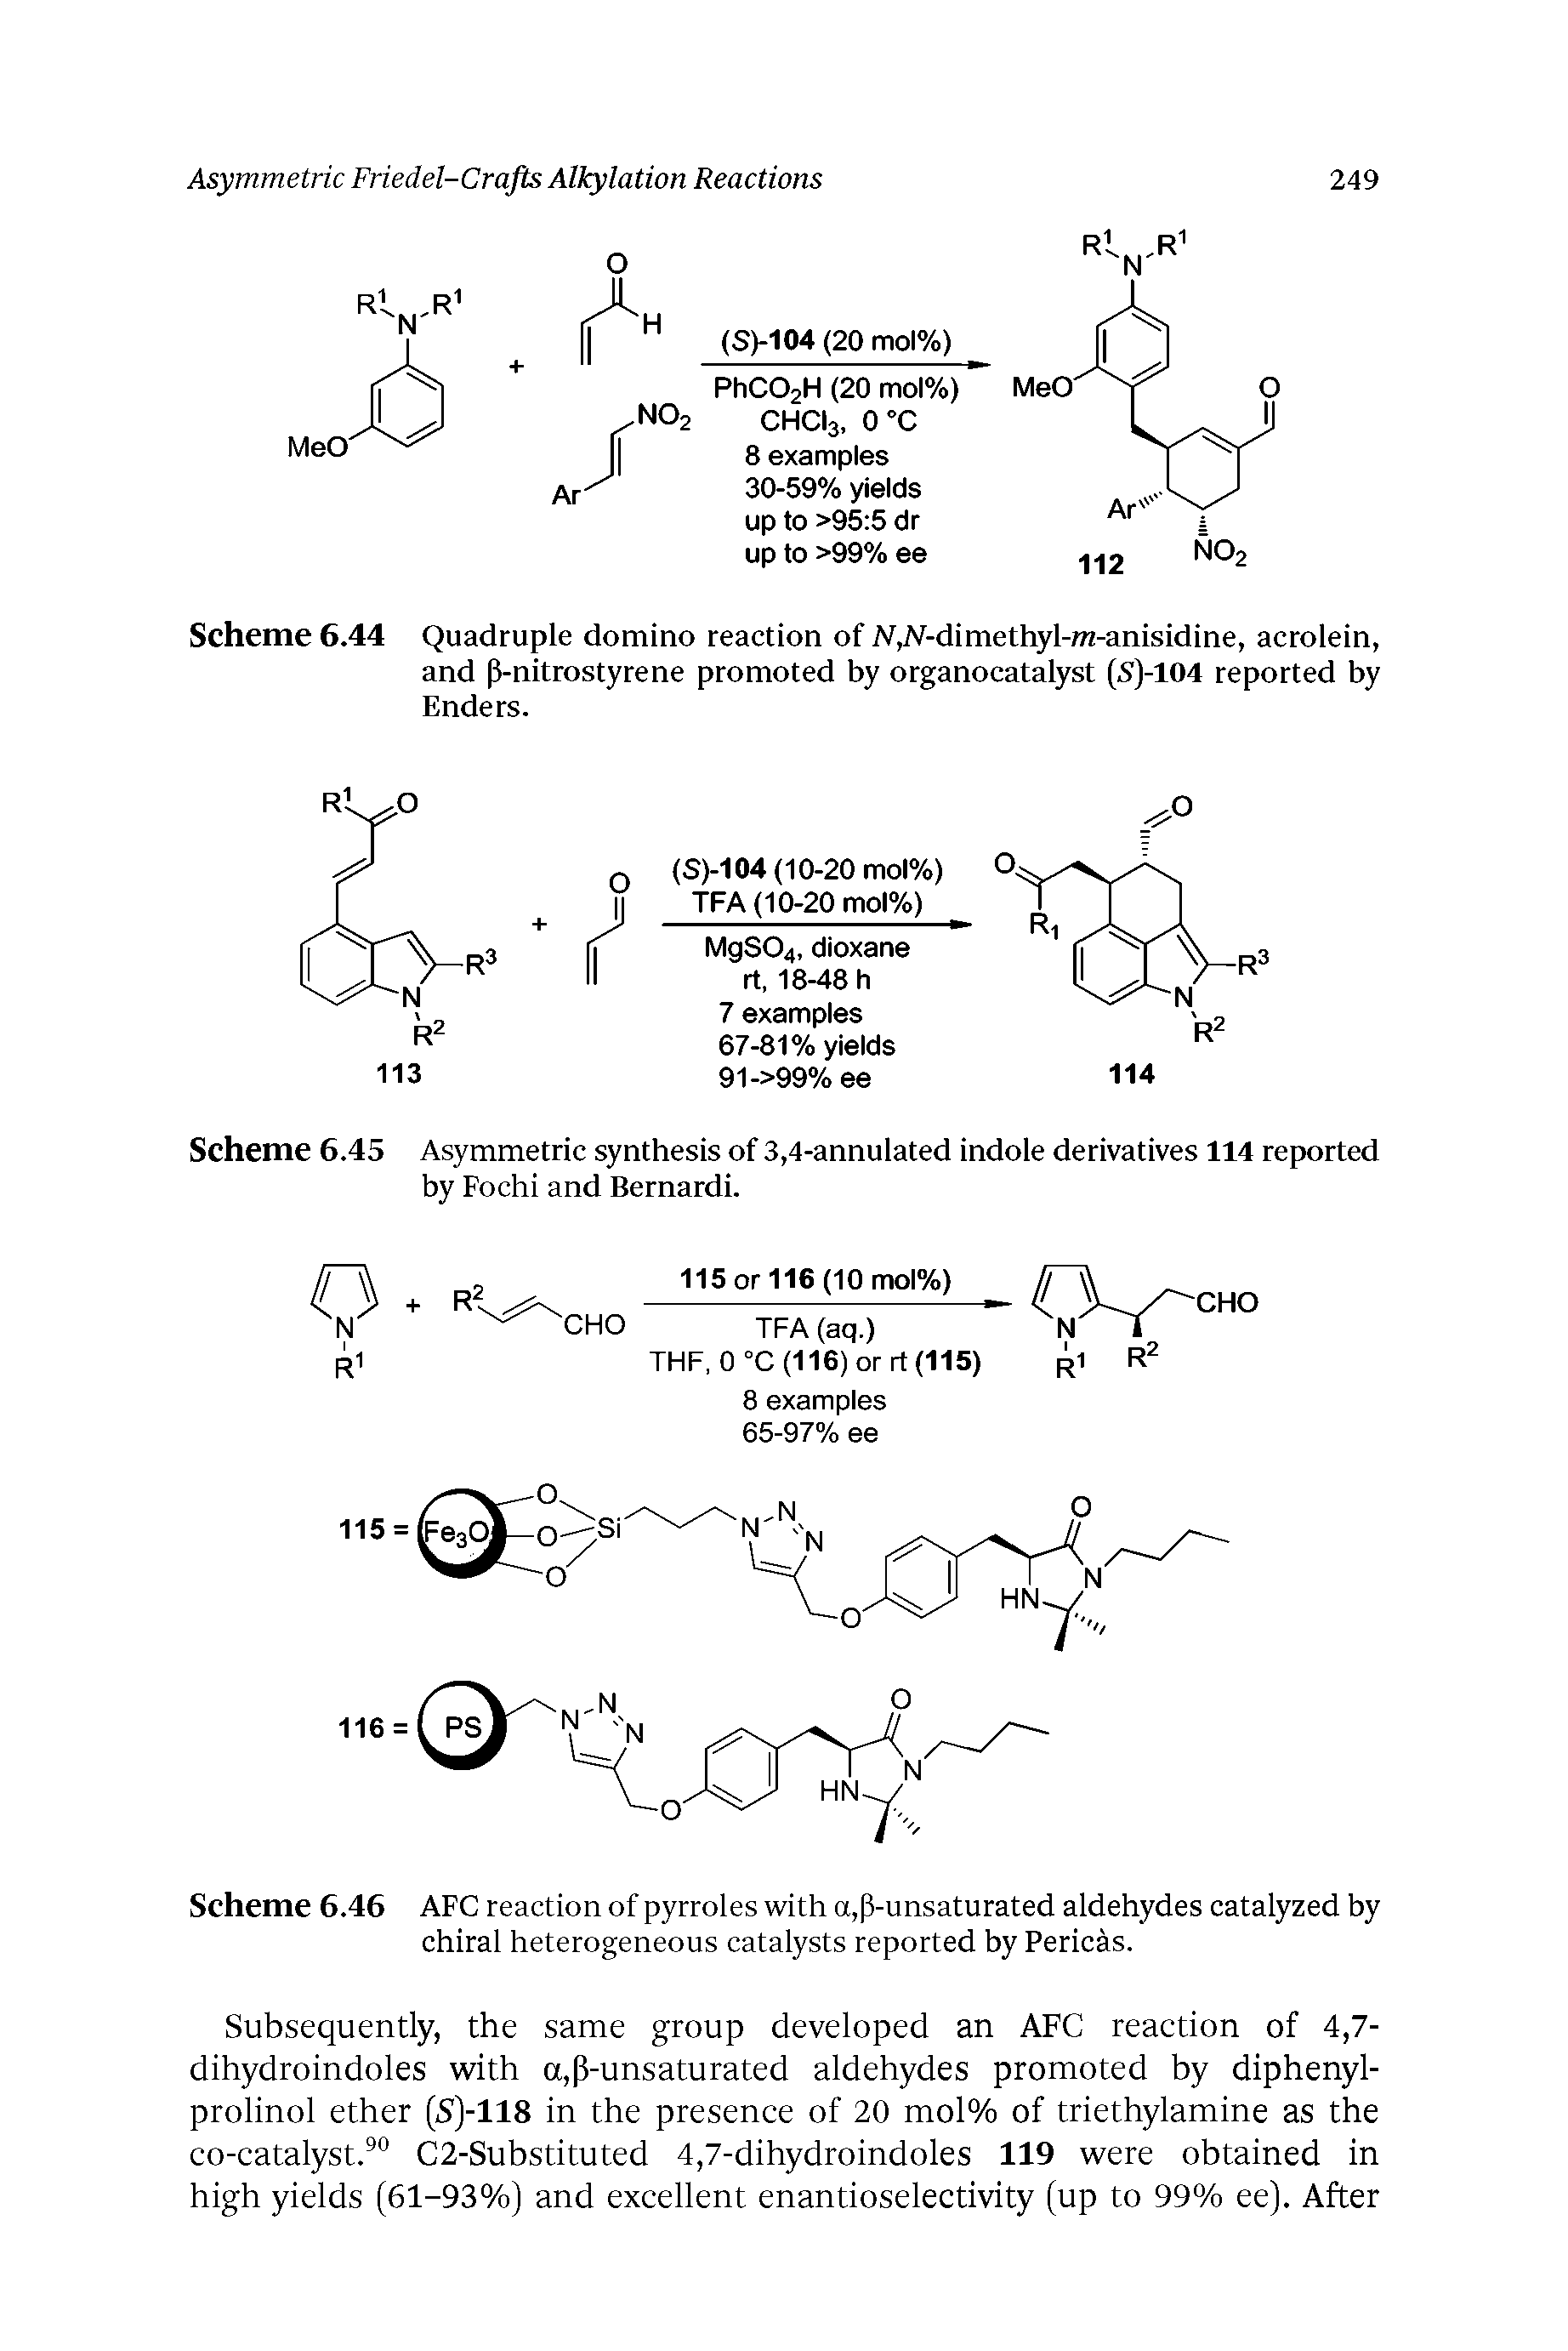 Scheme 6.44 Quadruple domino reaction of N -dimethyl-7H-anisidine, acrolein, and p-nitrostyrene promoted by organocatalyst (S)-104 reported by Enders.